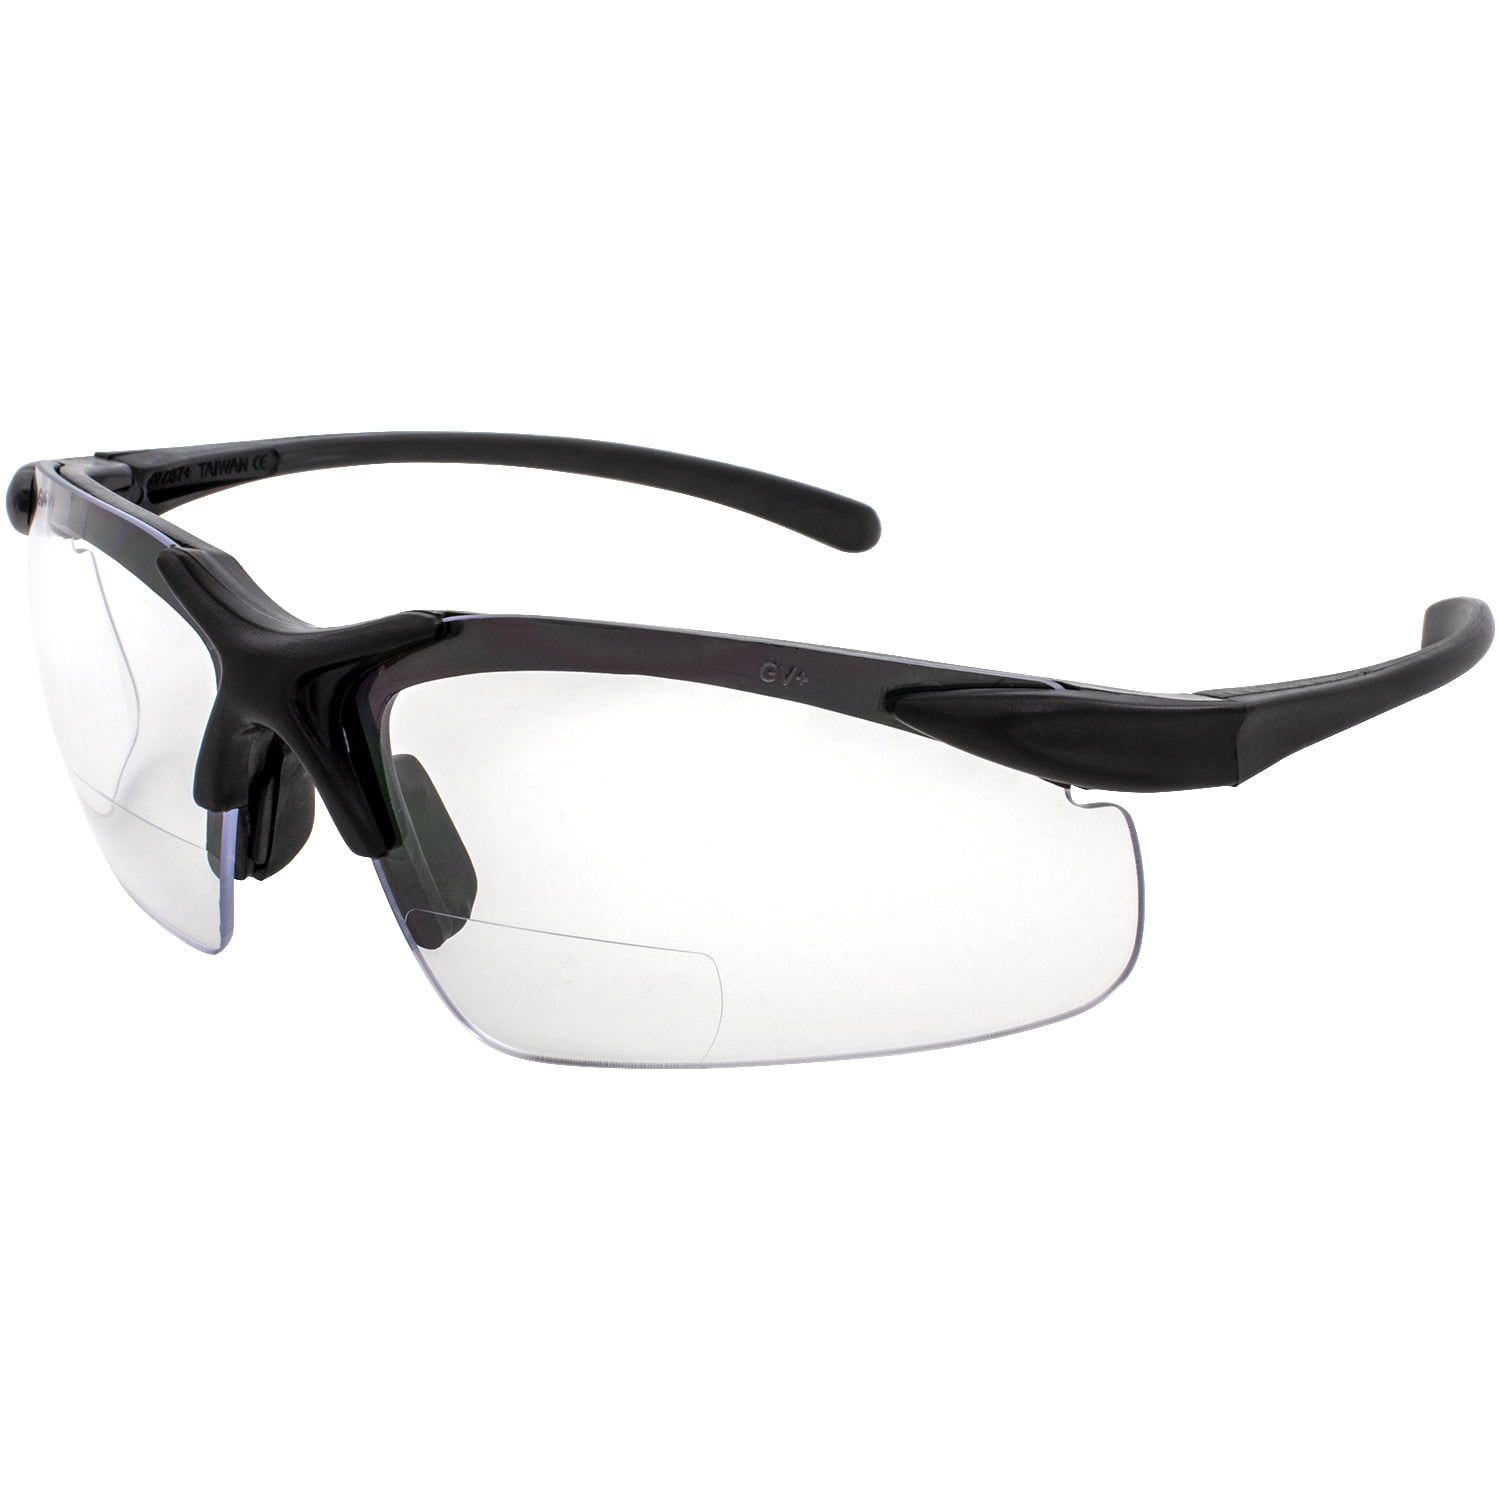 Pyramex Emerge Full Lens Magnification Safety Glasses w/ Clear 3.0 Lens